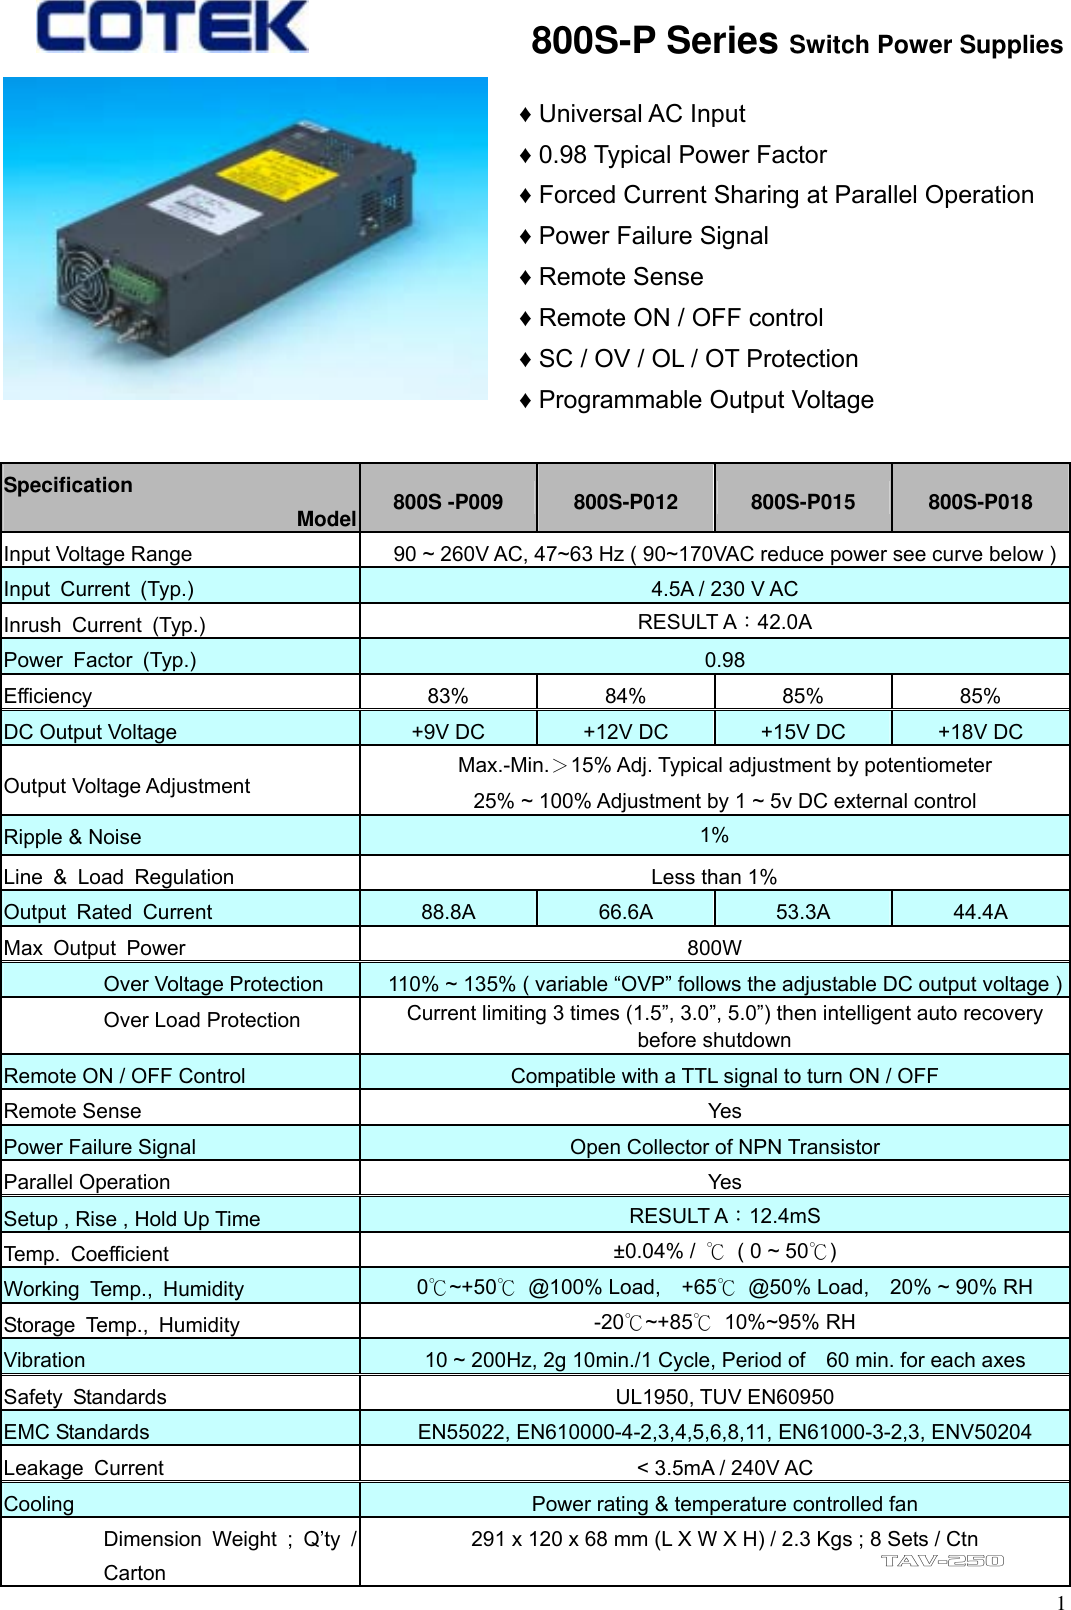      800S-P Series Switch Power Supplies ♦ Universal AC Input ♦ 0.98 Typical Power Factor   ♦ Forced Current Sharing at Parallel Operation ♦ Power Failure Signal ♦ Remote Sense ♦ Remote ON / OFF control   ♦ SC / OV / OL / OT Protection ♦ Programmable Output Voltage  Specification       Model 800S -P009  800S-P012  800S-P015  800S-P018 Input Voltage Range  90 ~ 260V AC, 47~63 Hz ( 90~170VAC reduce power see curve below )Input Current (Typ.)  4.5A / 230 V AC Inrush Current (Typ.)  RESULT A：42.0A Power Factor (Typ.)  0.98  Efficiency  83% 84% 85% 85% DC Output Voltage  +9V DC  +12V DC  +15V DC  +18V DC Output Voltage Adjustment Max.-Min.＞15% Adj. Typical adjustment by potentiometer 25% ~ 100% Adjustment by 1 ~ 5v DC external control Ripple &amp; Noise  1% Line &amp; Load Regulation  Less than 1% Output Rated Current  88.8A  66.6A  53.3A  44.4A Max Output Power  800W Over Voltage Protection    110% ~ 135% ( variable “OVP” follows the adjustable DC output voltage )Over Load Protection    Current limiting 3 times (1.5”, 3.0”, 5.0”) then intelligent auto recovery before shutdown   Remote ON / OFF Control    Compatible with a TTL signal to turn ON / OFF   Remote Sense  Yes Power Failure Signal  Open Collector of NPN Transistor Parallel Operation  Yes Setup , Rise , Hold Up Time    RESULT A：12.4mS Temp. Coefficient   ±0.04% /  ℃  ( 0 ~ 50℃) Working Temp., Humidity   0℃~+50℃ @100% Load,  +65℃  @50% Load,    20% ~ 90% RH Storage Temp., Humidity   -20℃~+85℃ 10%~95% RH Vibration   10 ~ 200Hz, 2g 10min./1 Cycle, Period of    60 min. for each axes Safety Standards   UL1950, TUV EN60950 EMC Standards    EN55022, EN610000-4-2,3,4,5,6,8,11, EN61000-3-2,3, ENV50204 Leakage Current   &lt; 3.5mA / 240V AC Cooling  Power rating &amp; temperature controlled fan   Dimension Weight ; Q’ty / Carton  291 x 120 x 68 mm (L X W X H) / 2.3 Kgs ; 8 Sets / Ctn  1TAV-250